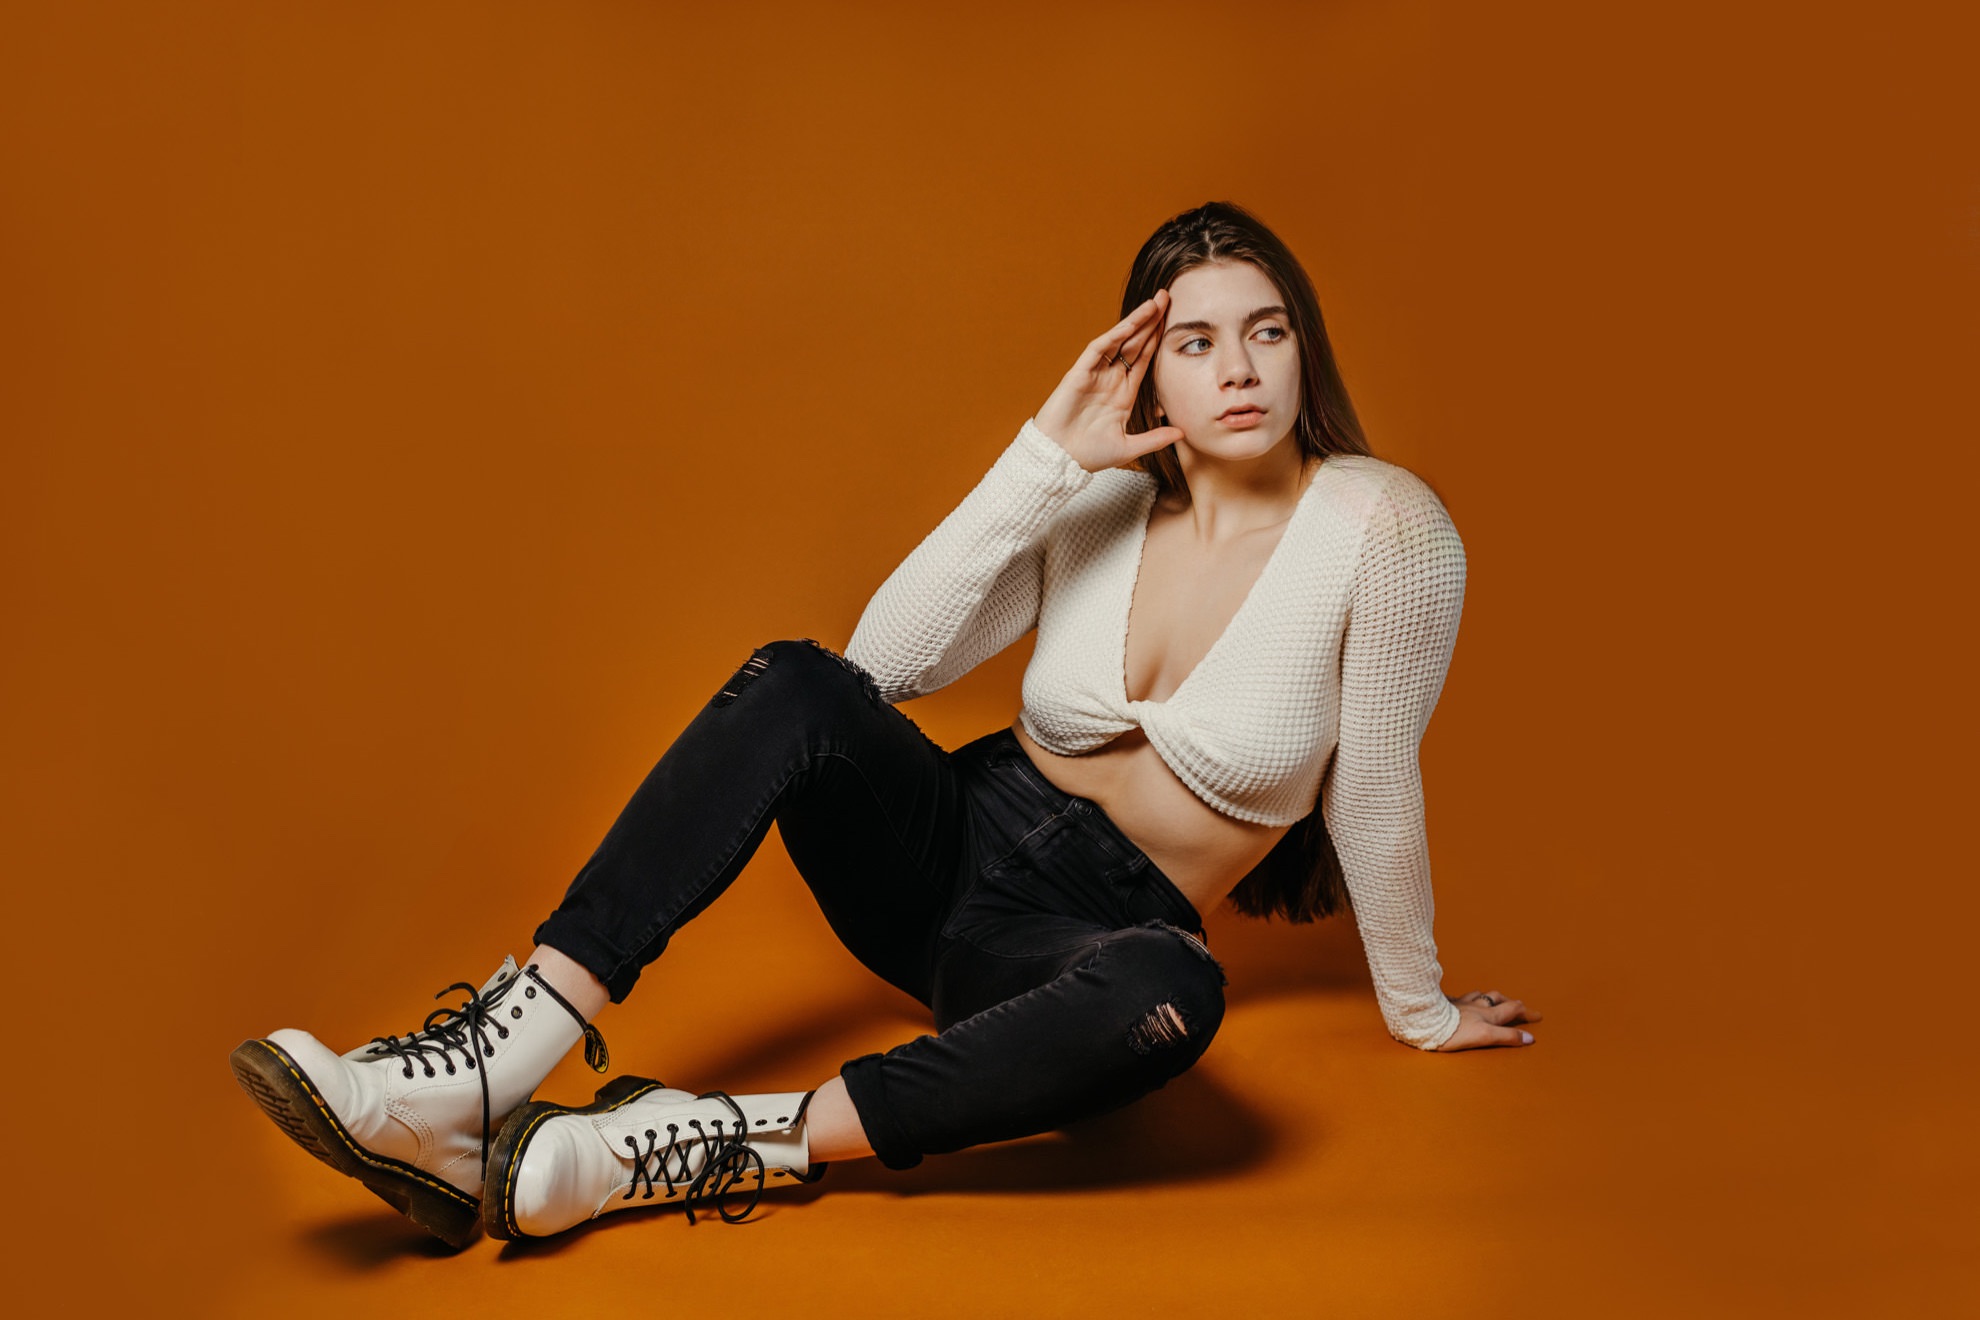 fashion photo of women in black and white outfit on orange background